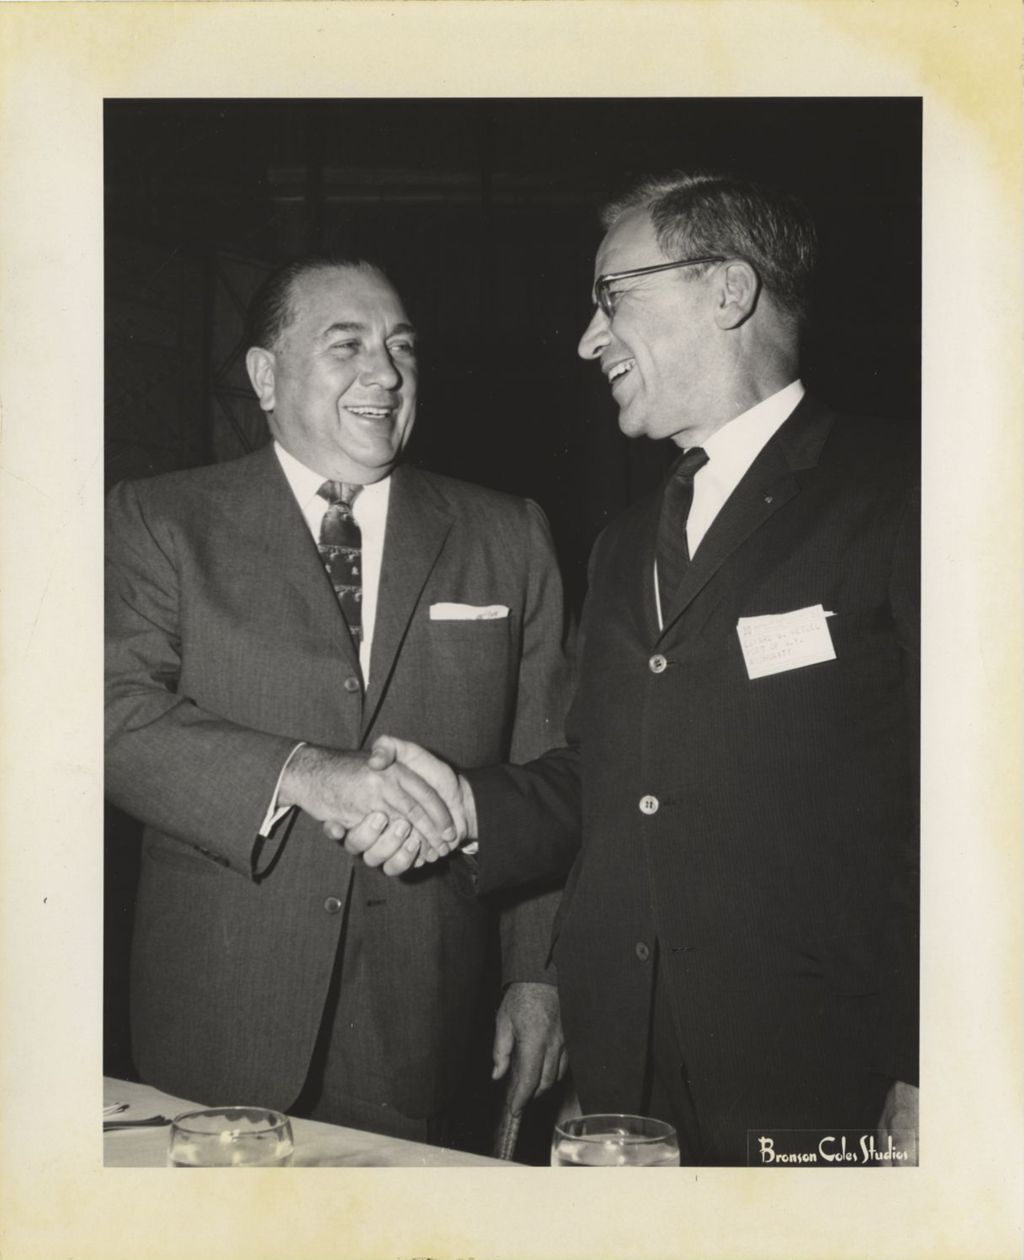 Miniature of Richard J. Daley with the President of the Institute of Traffic Engineers